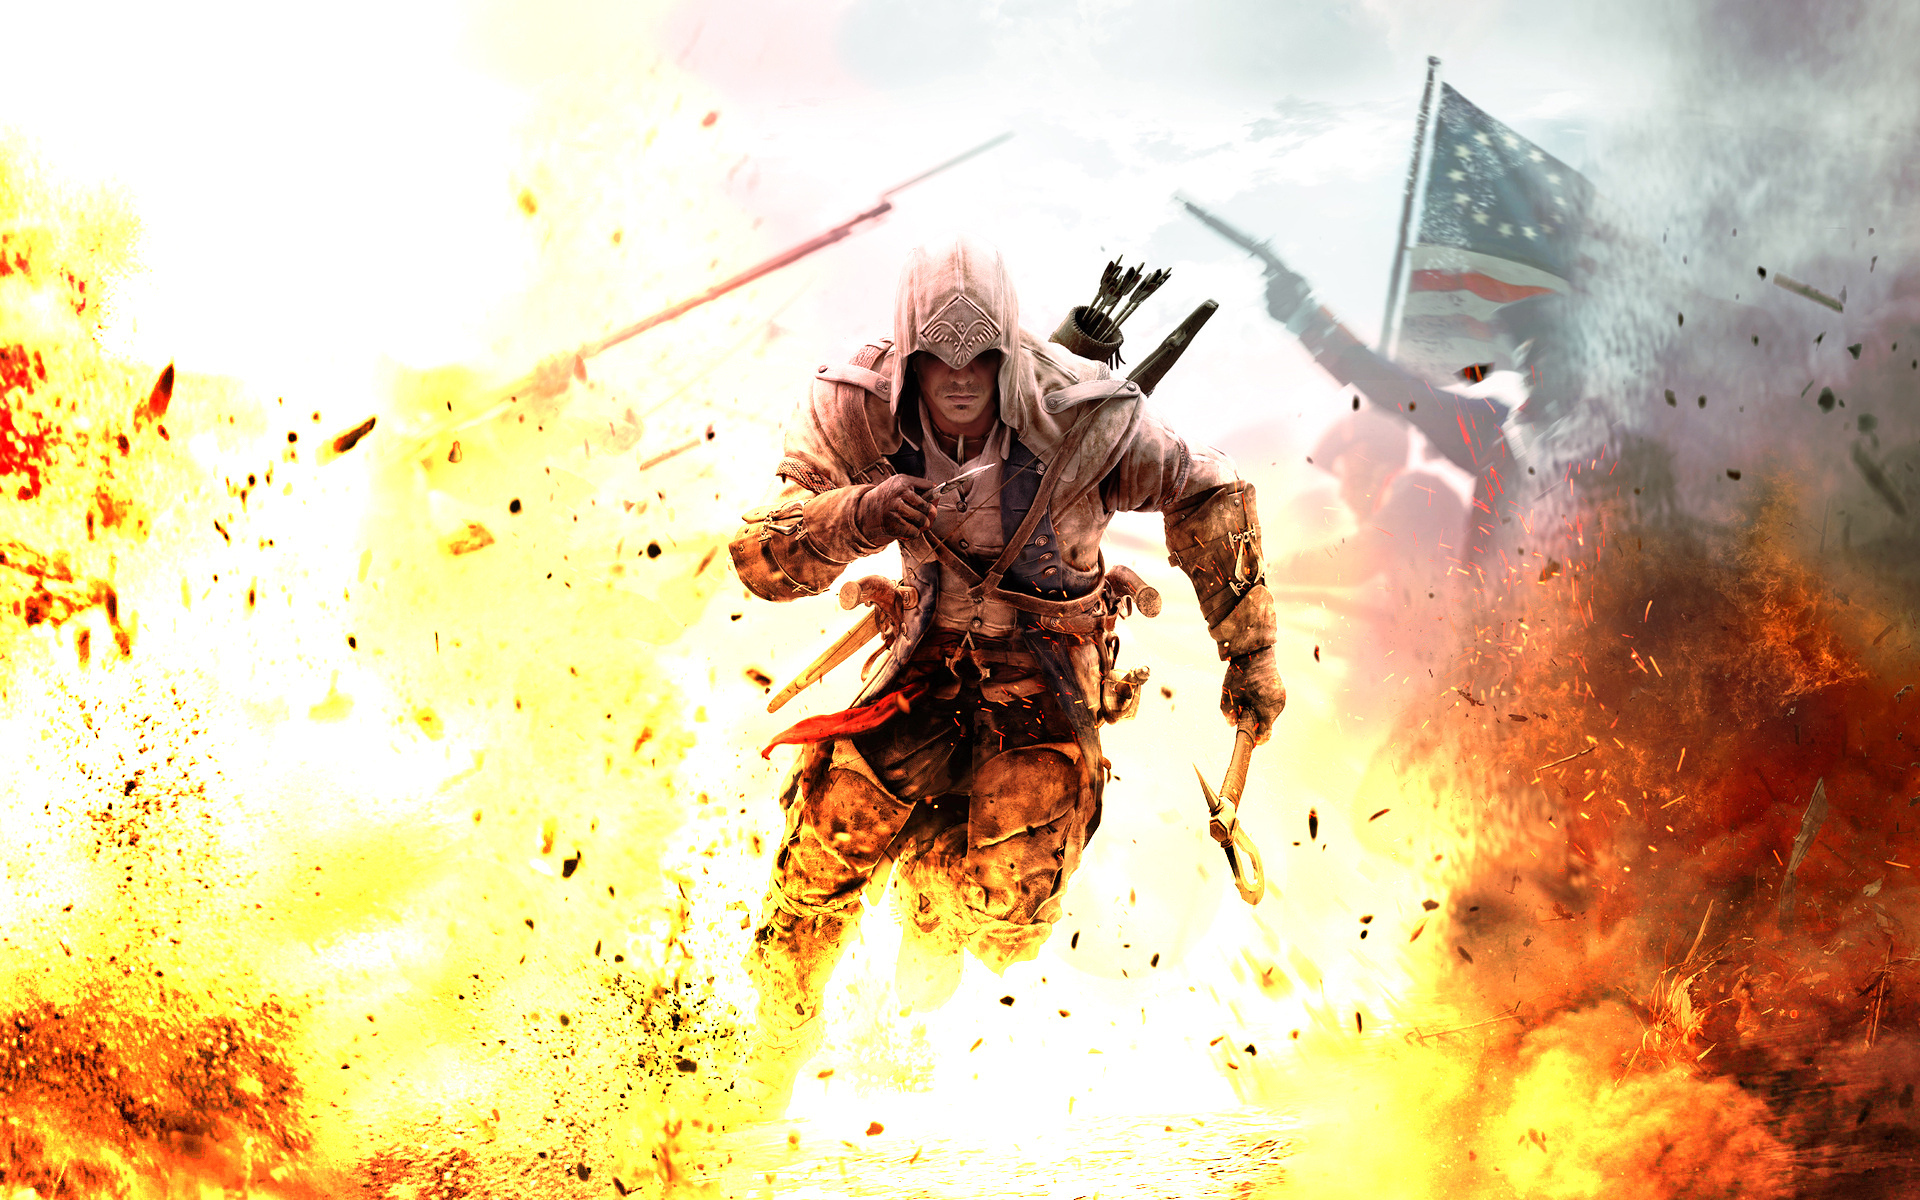 assassins creed, Assassins, Creed, Fantasy, Warriors, Soldiers, Fire, Flames, Explosions, Weapons, Swords Wallpaper